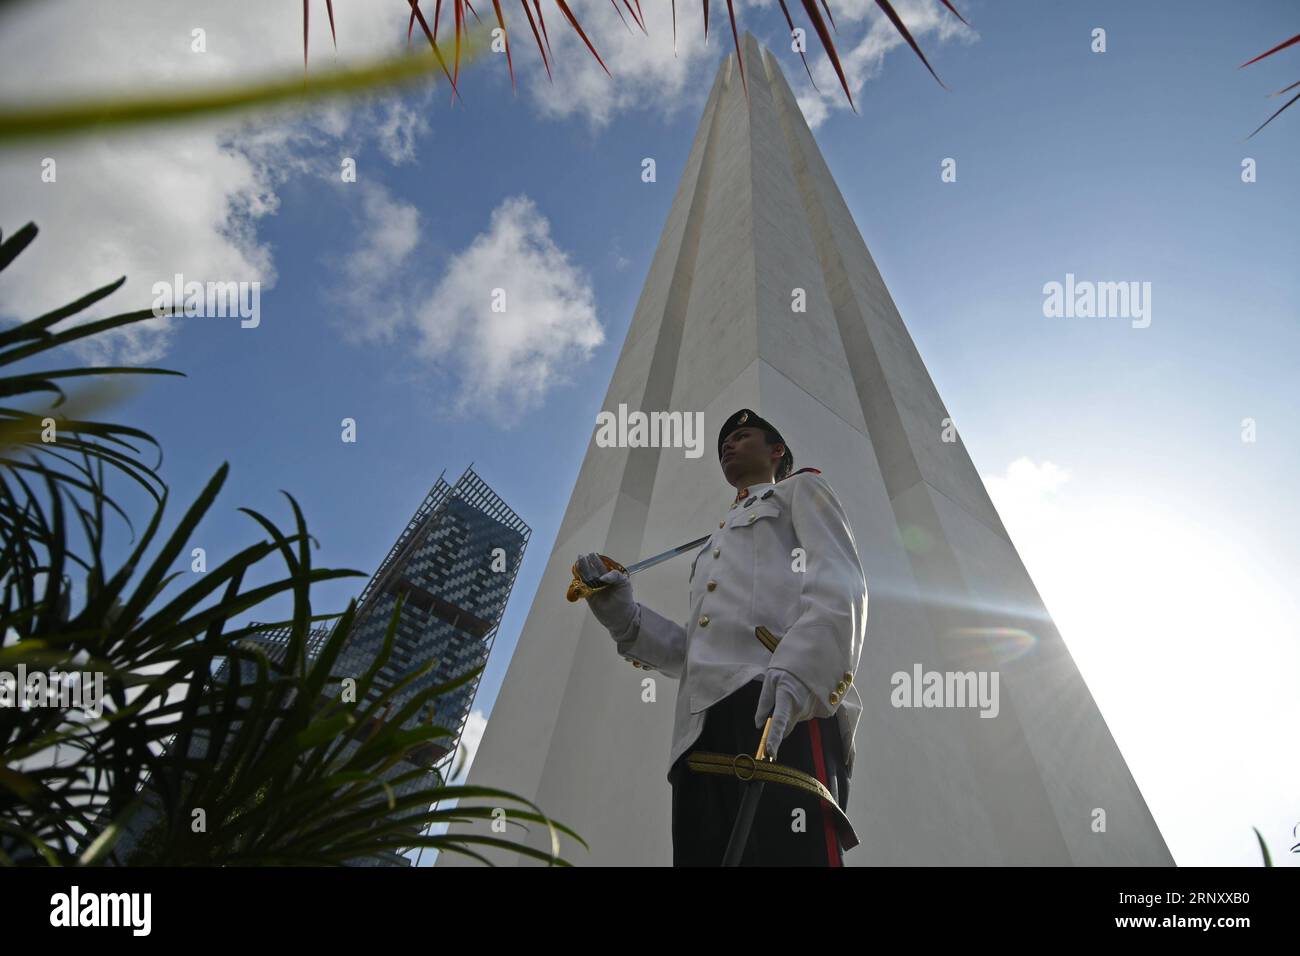 (180215) -- SINGAPORE, Feb. 15, 2018 -- A National Cadet Corp (NCC) student cadet stands on post during the war memorial service held at the War Memorial Park in Singapore on Feb. 15, 2018. Singapore Thursday held the 51st War Memorial Service in commemoration of the civilian victims of the Japanese Occupation and Total Defence Day Commemoration event. ) (zf) SINGAPORE-WAR-MEMORIAL-JAPANESE OCCUPATION ThenxChihxWey PUBLICATIONxNOTxINxCHN Stock Photo